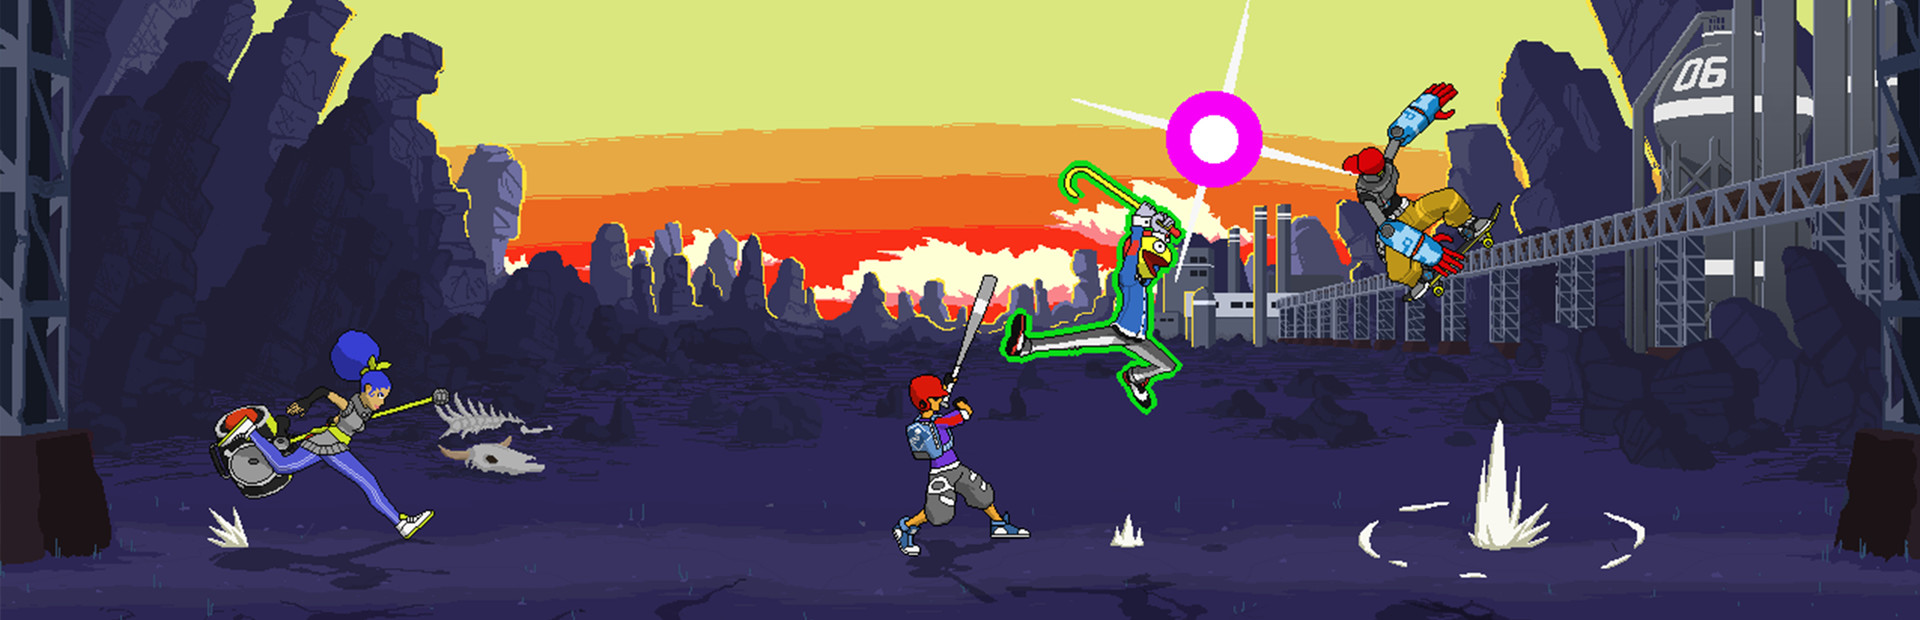 Lethal League cover image